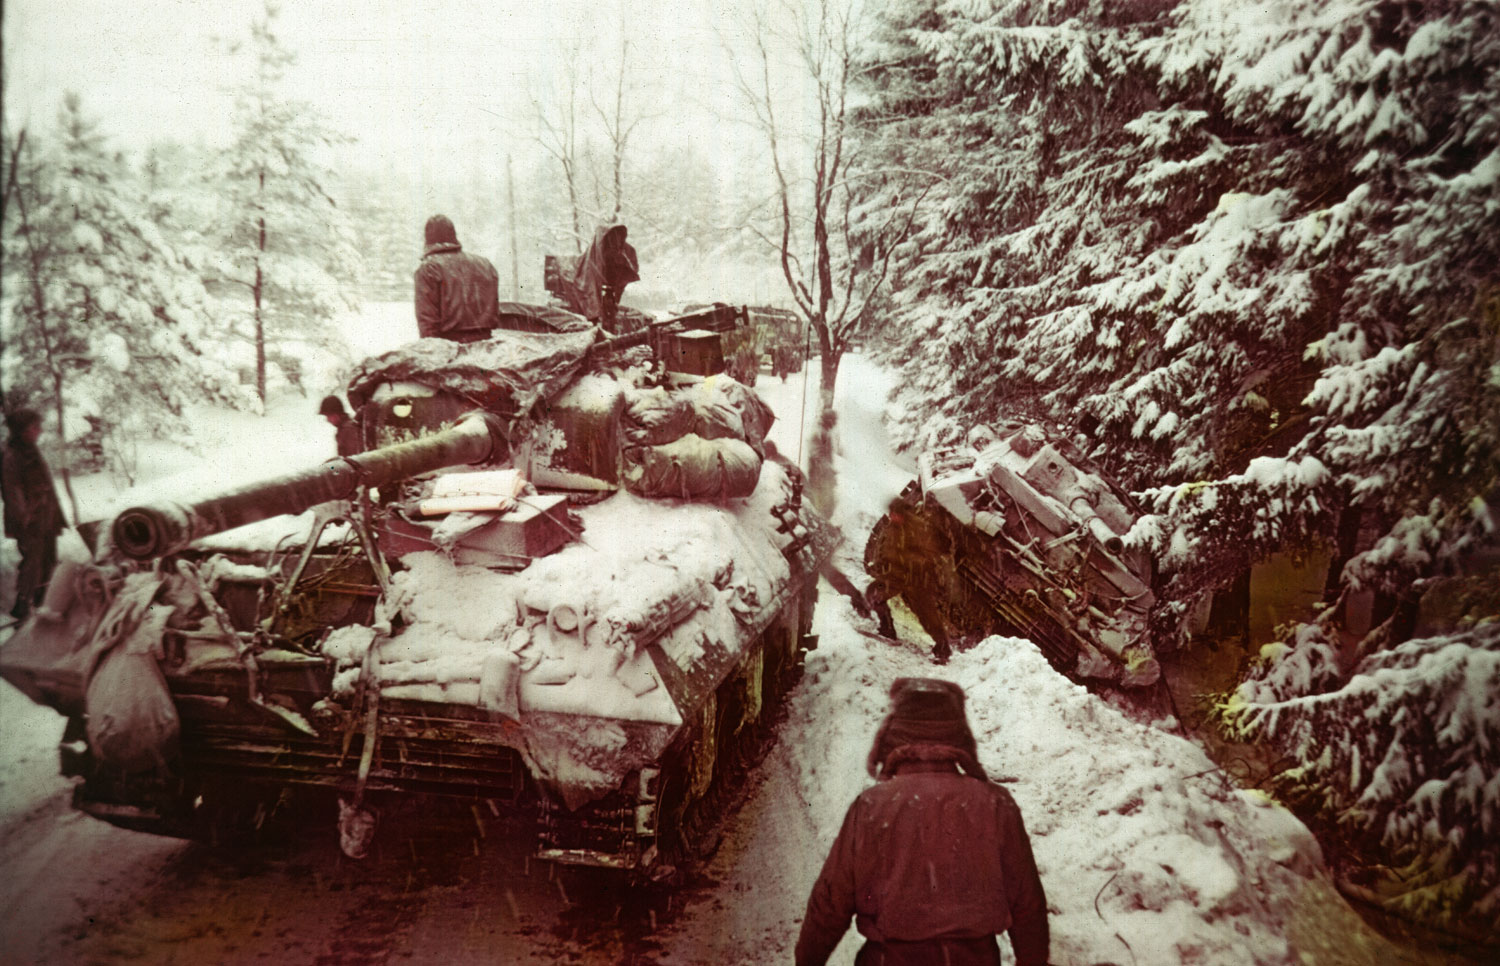 An American tank moves past another gun carriage which slid off an icy road in the Ardennes Forest during the Battle of the Bulge, Dec. 20, 1944.